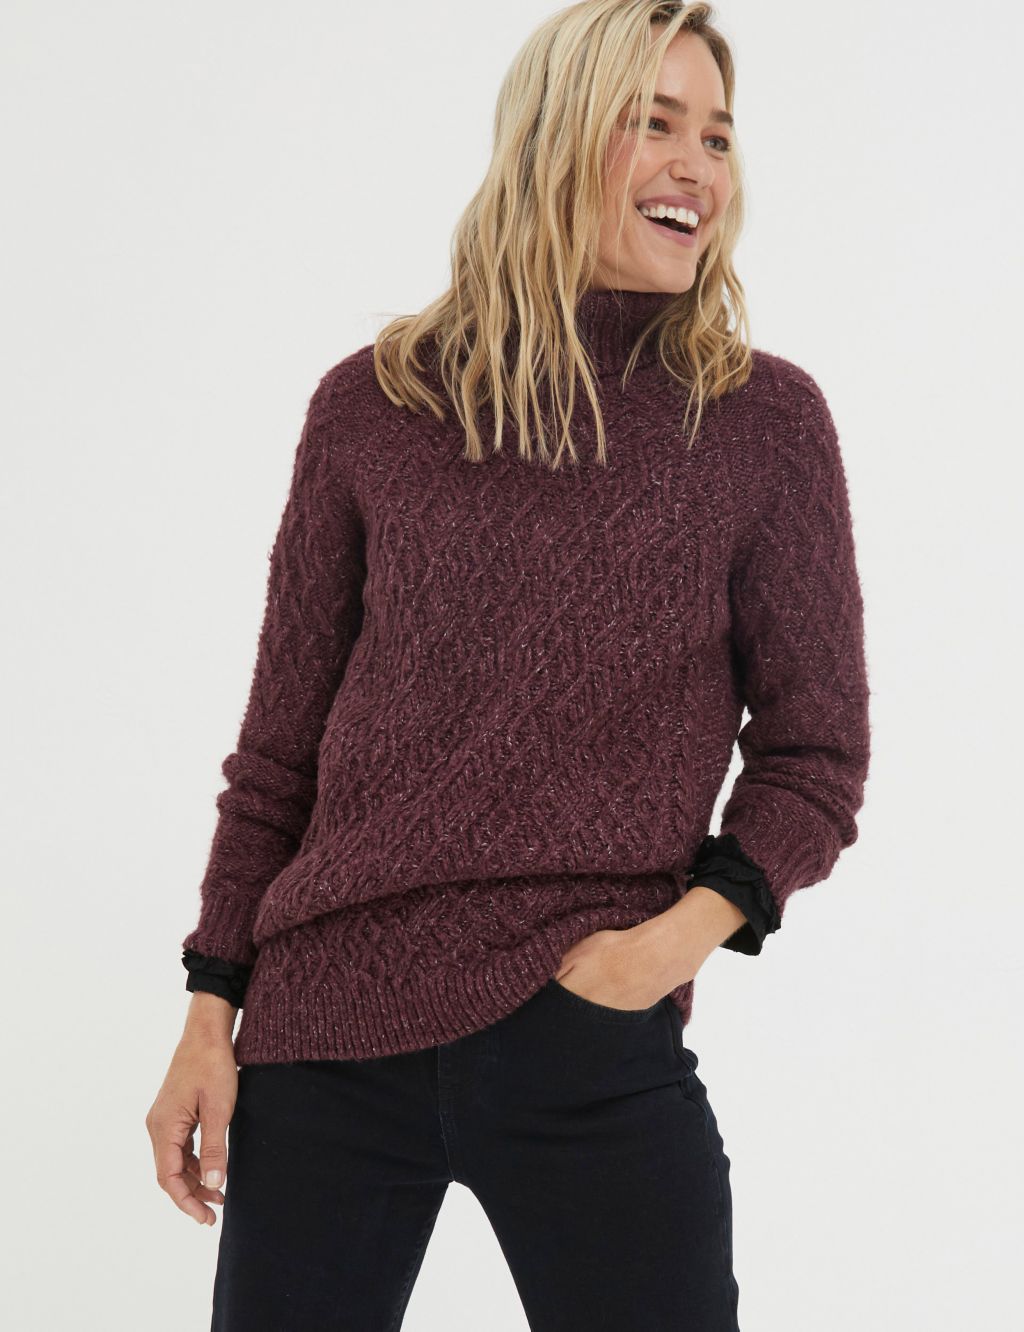 Cable Knit Roll Neck Jumper with Cotton image 1